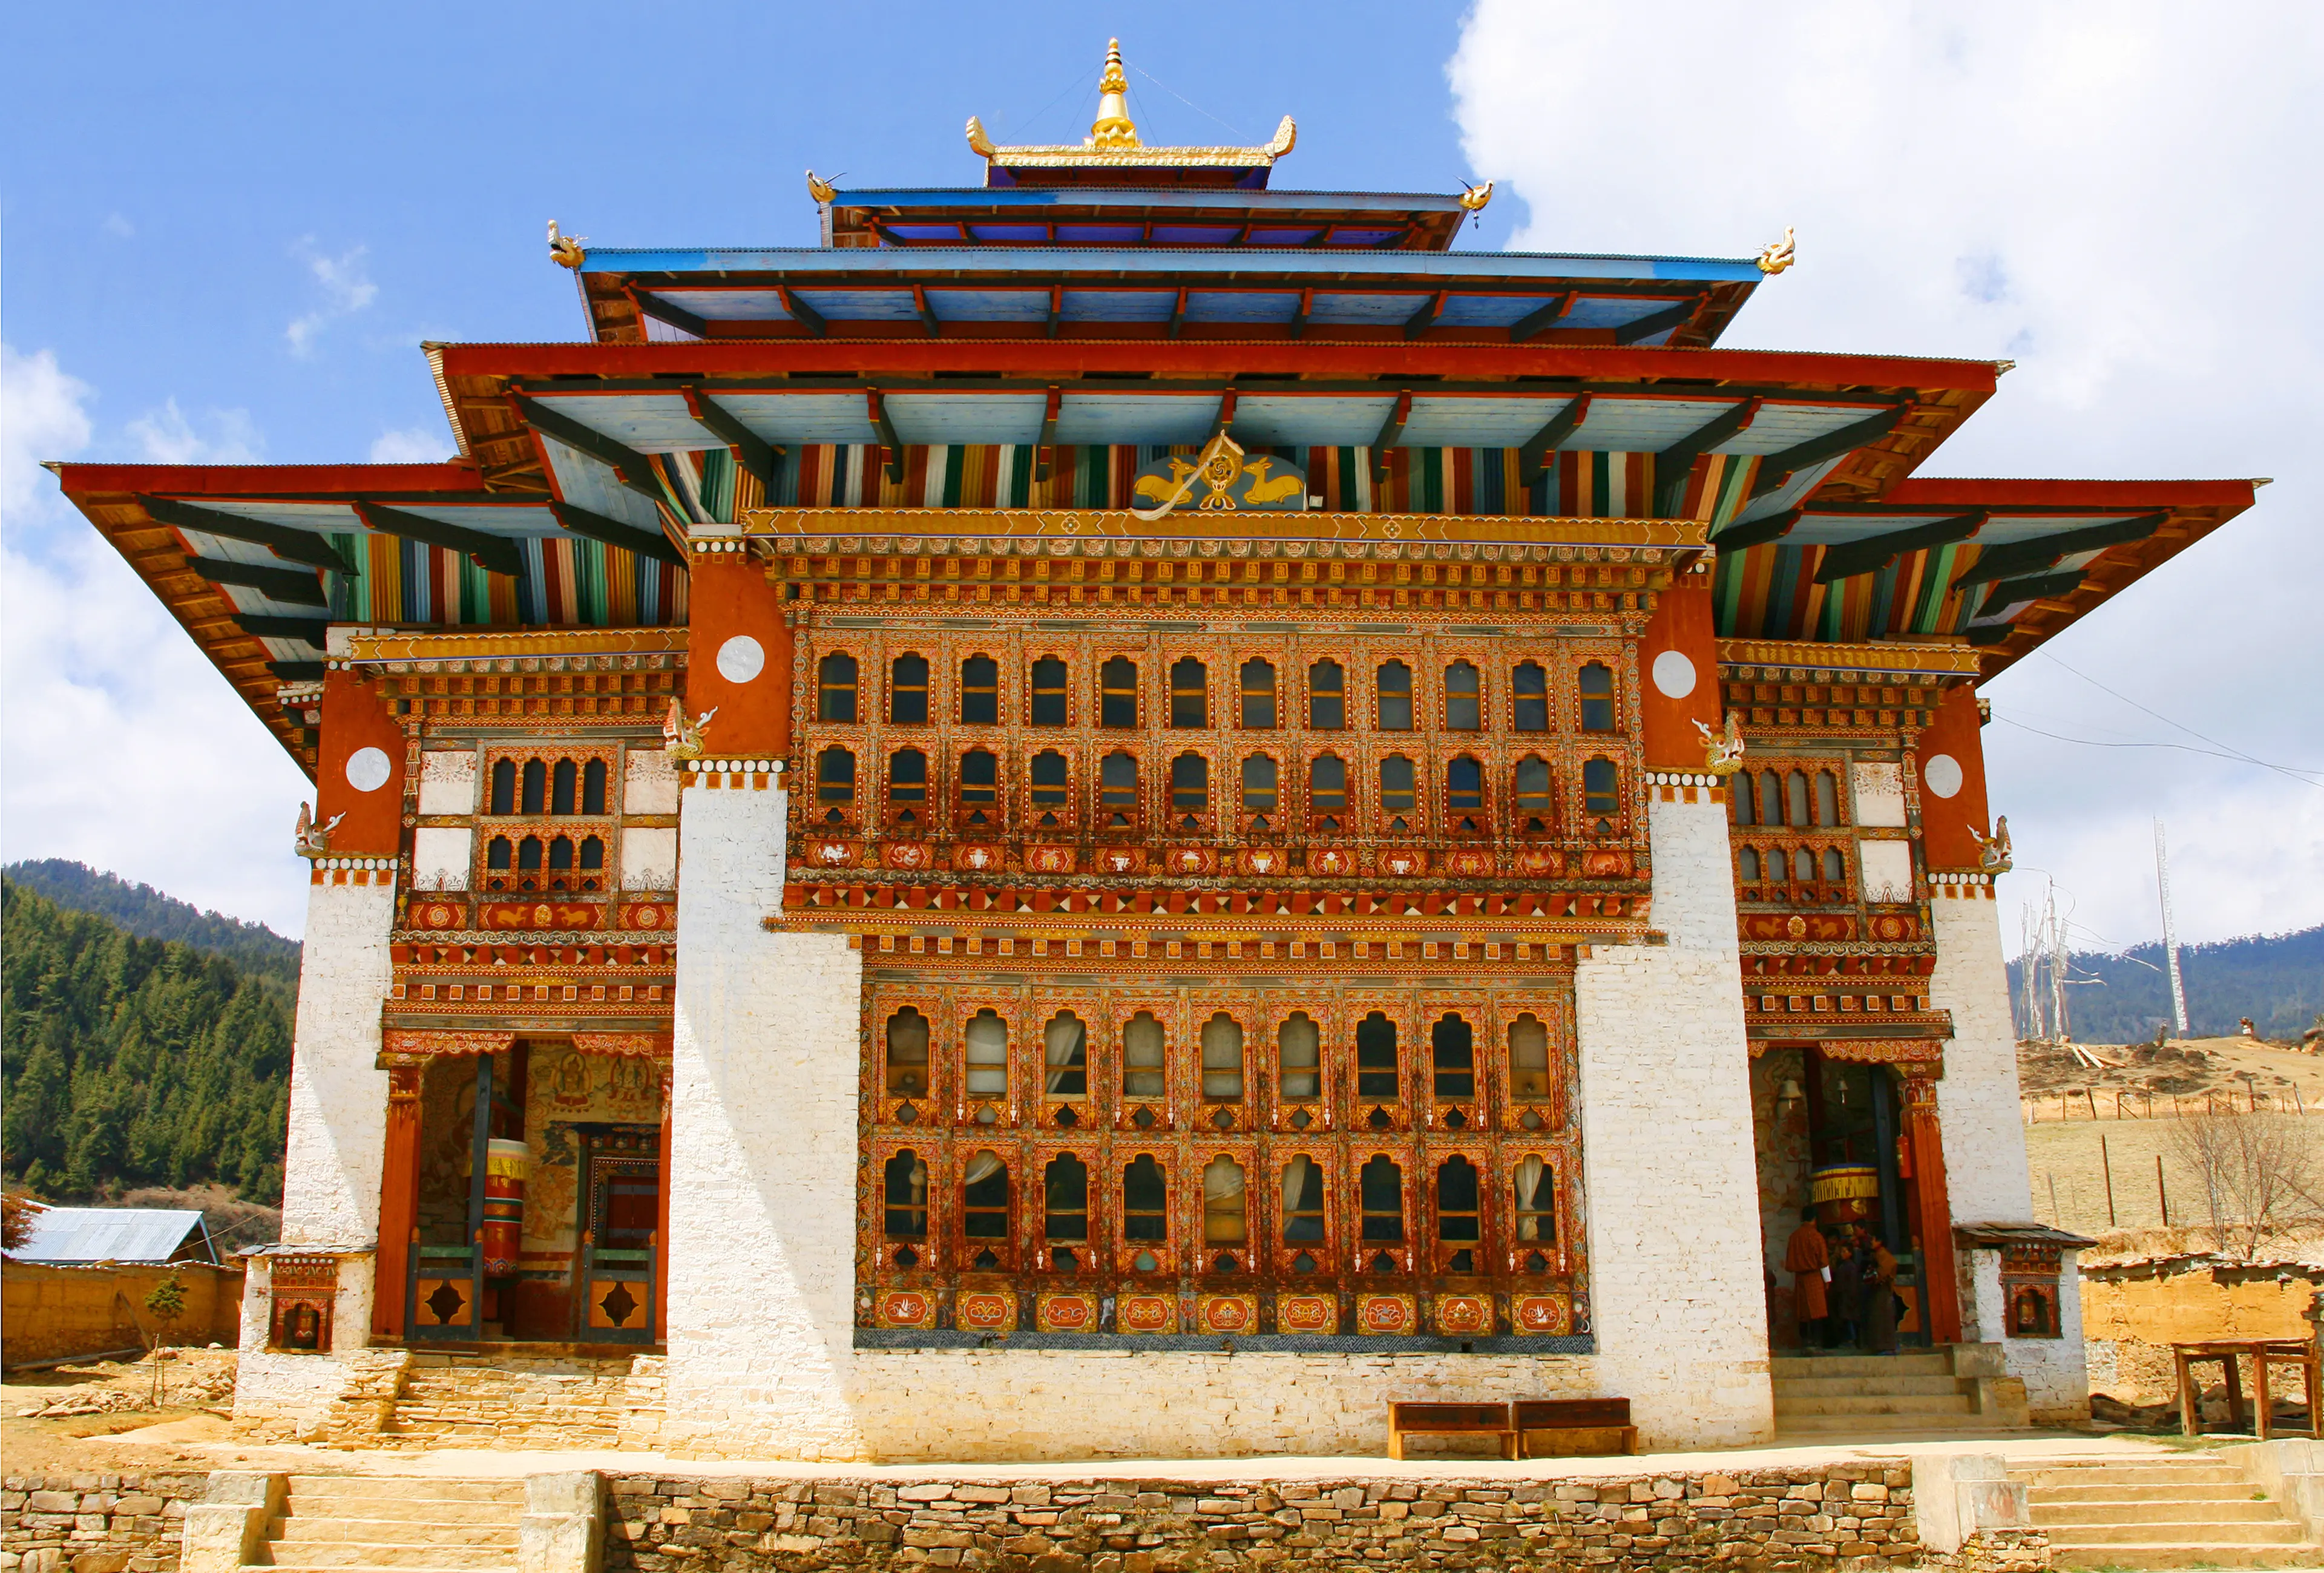 2-Day Bhutan Adventure: Outdoor Activities and Shopping with Friends